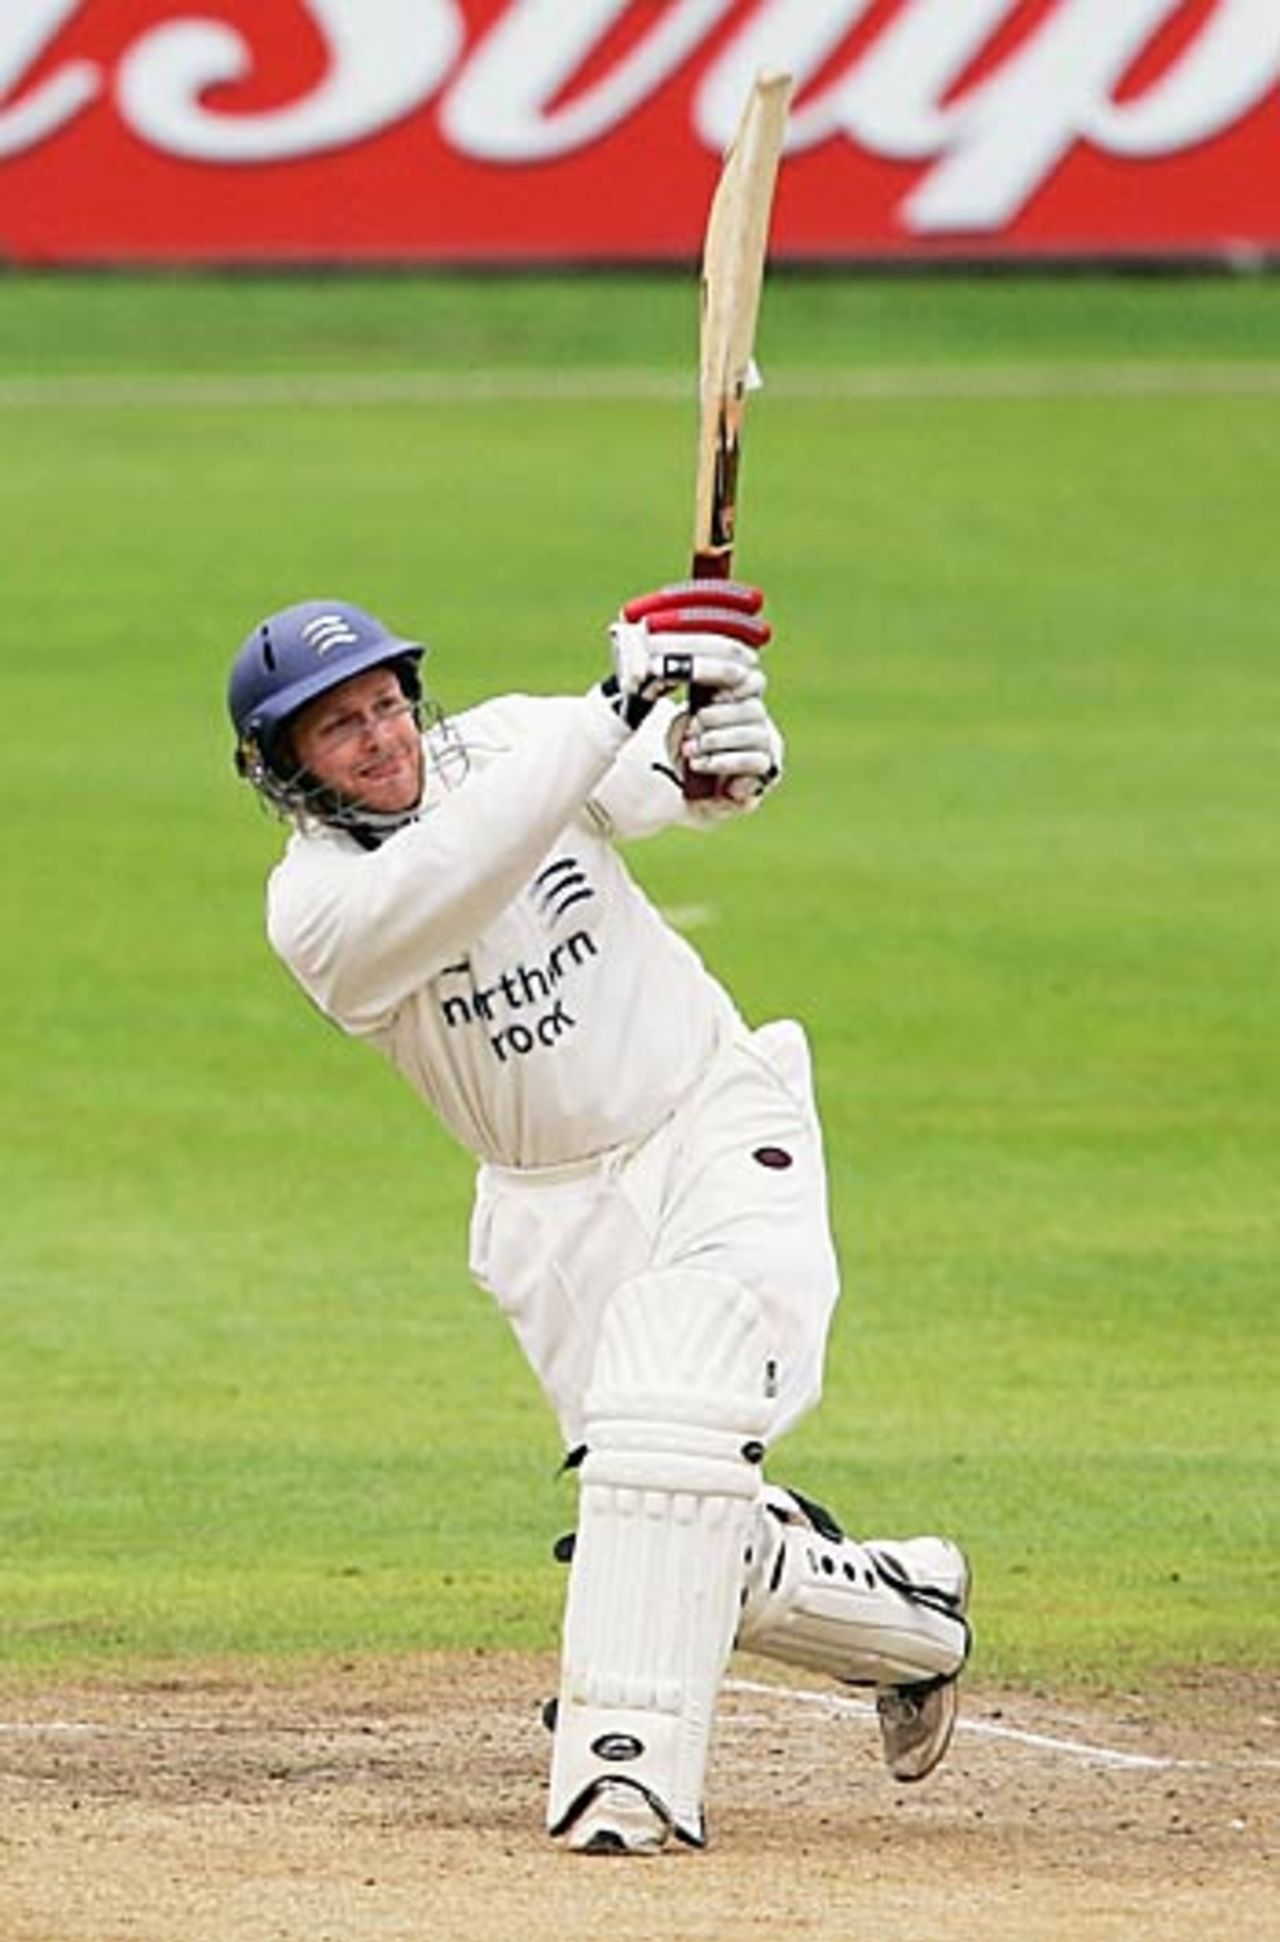 David Nash goes over the top during his unbeaten 68, Lancashire v Middlesex, County Championship, Old Trafford, August 20, 2006